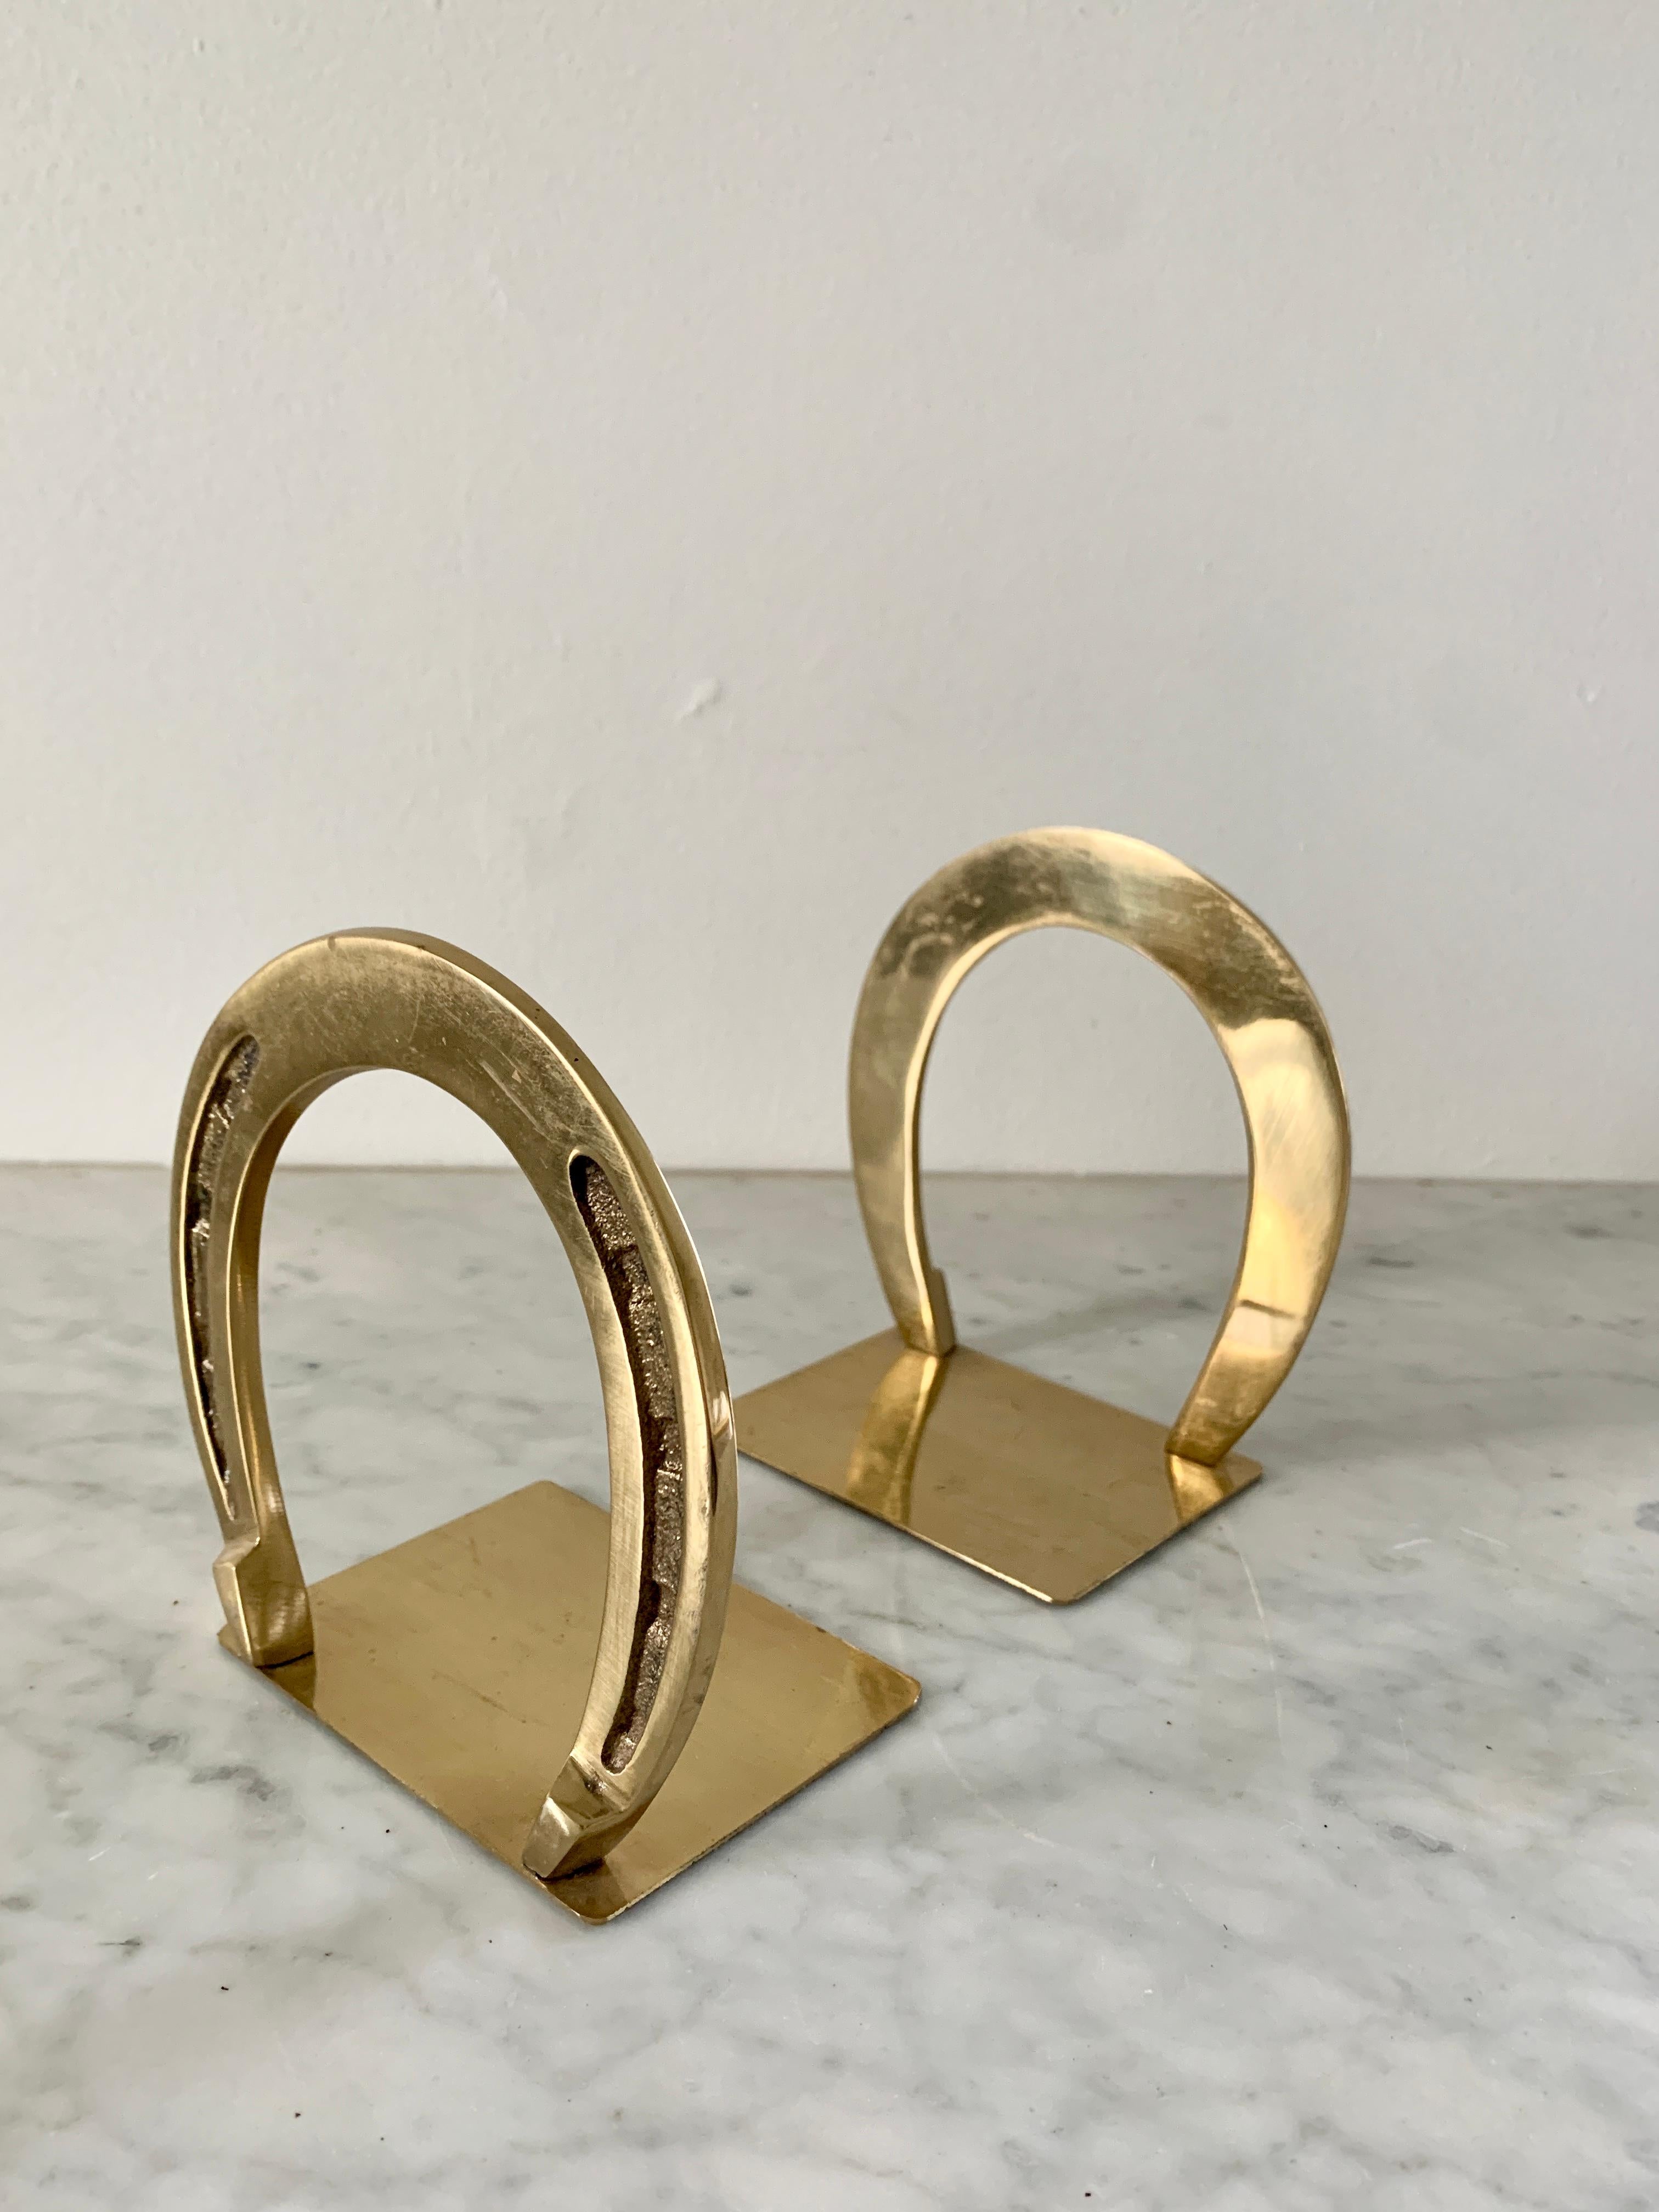 A charming pair of cast solid brass horseshoe bookends

Late-20th Century

Measures: 4.88